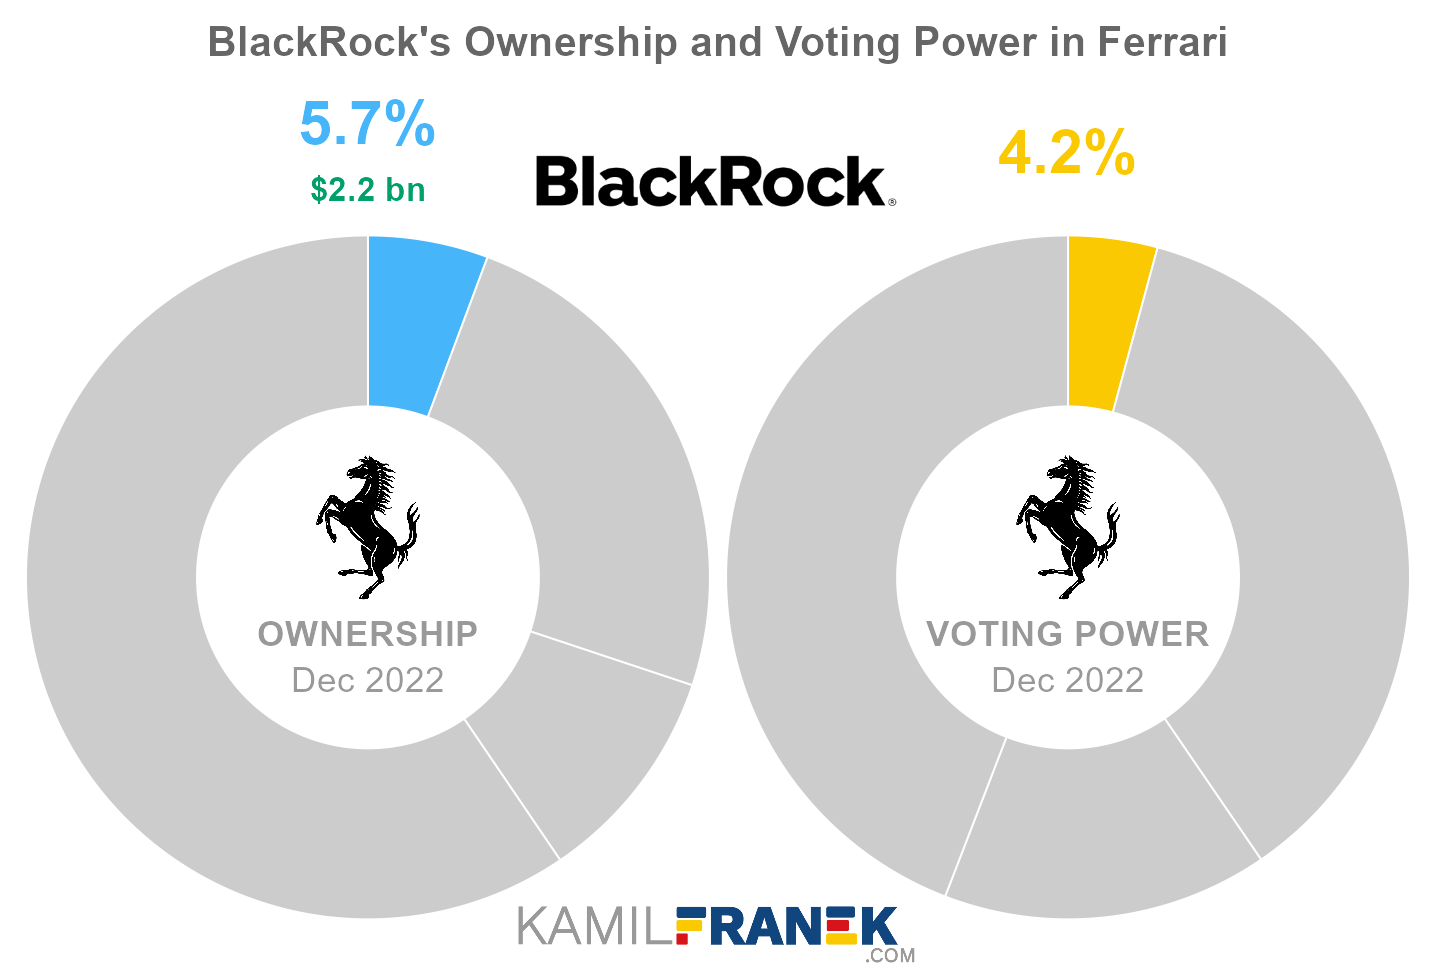 BlackRock's share ownership and voting power in Ferrari (chart)